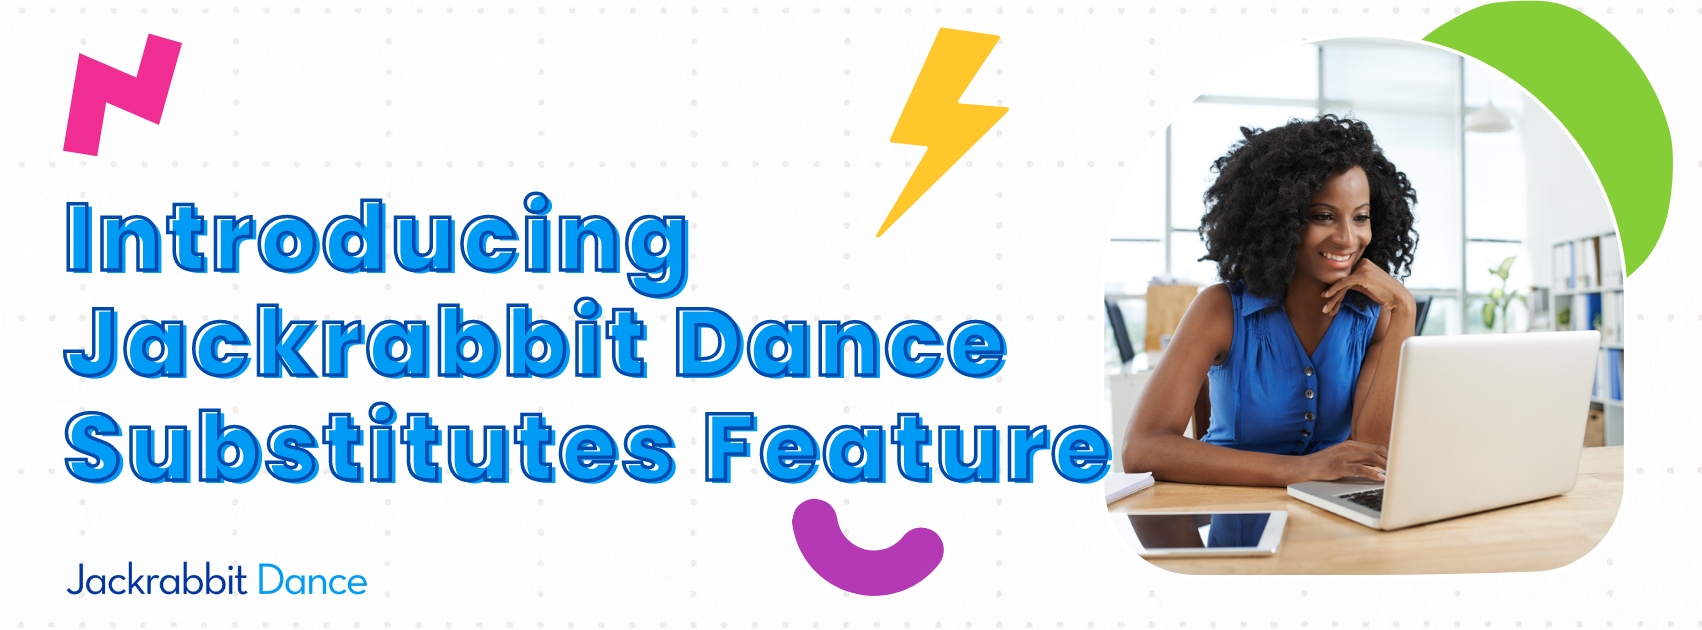 Introducing the new Jackrabbit Dance Substitutes feature.